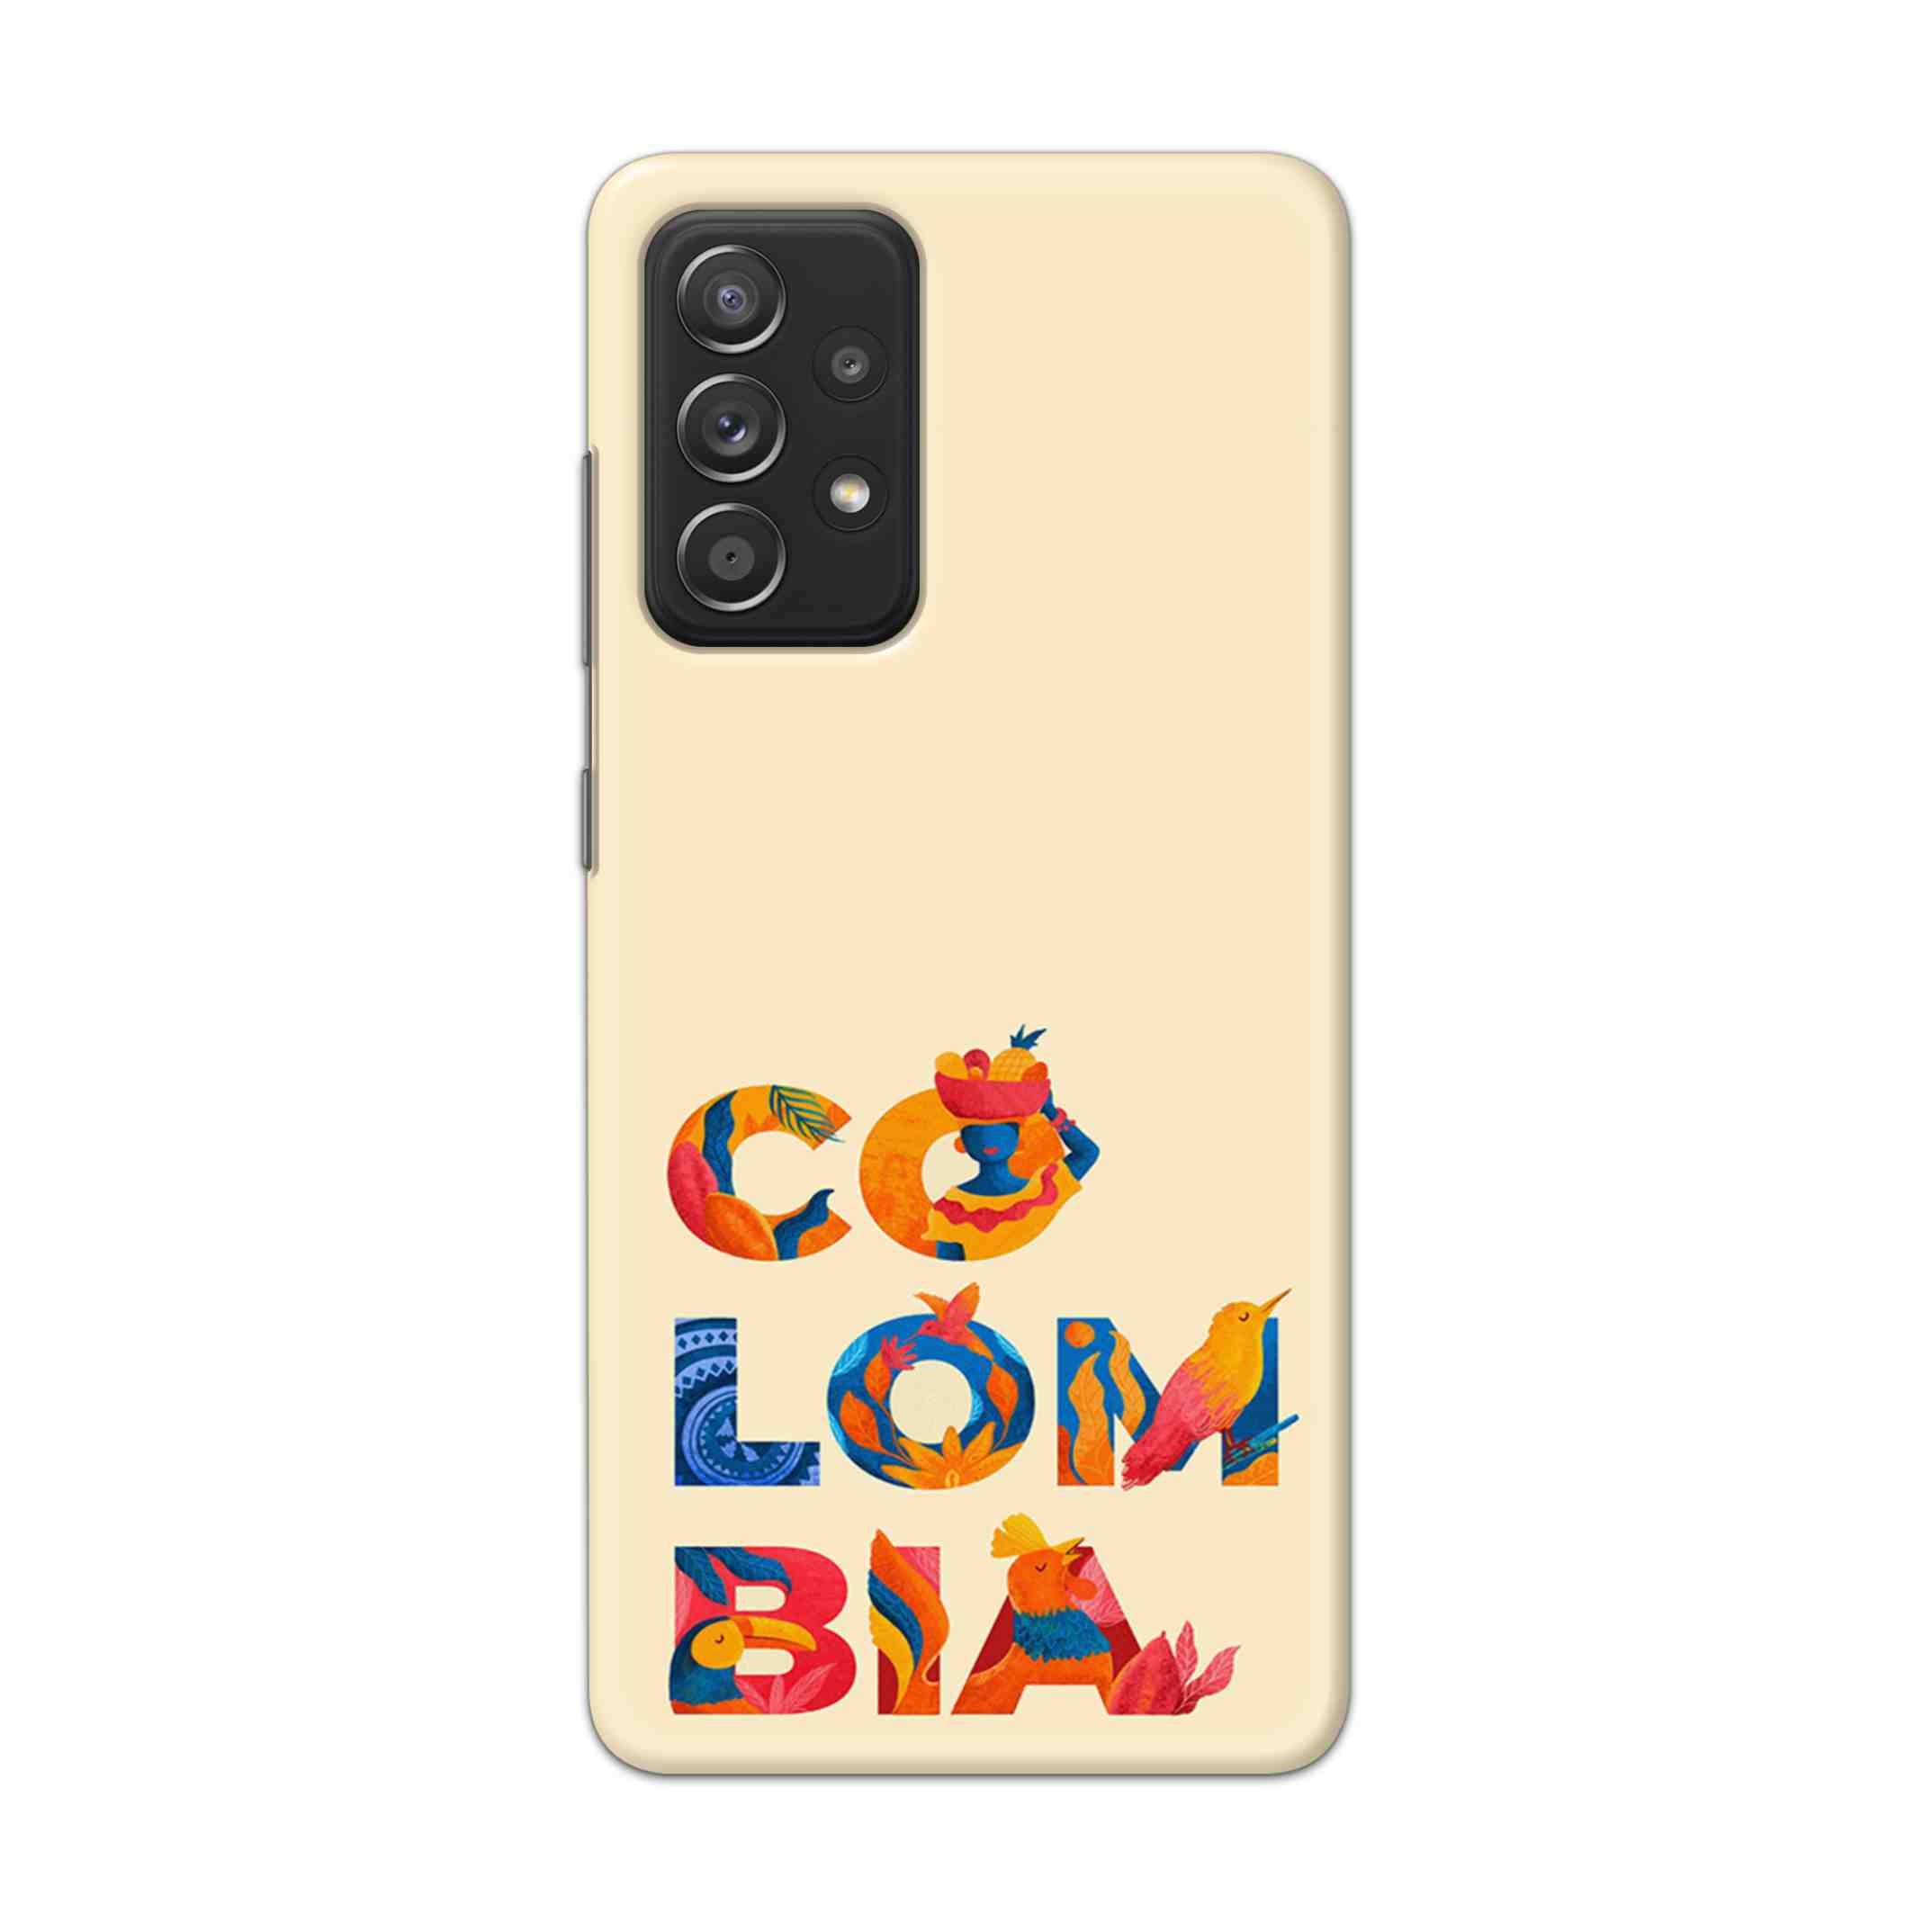 Buy Colombia Hard Back Mobile Phone Case Cover For Samsung Galaxy A52 Online